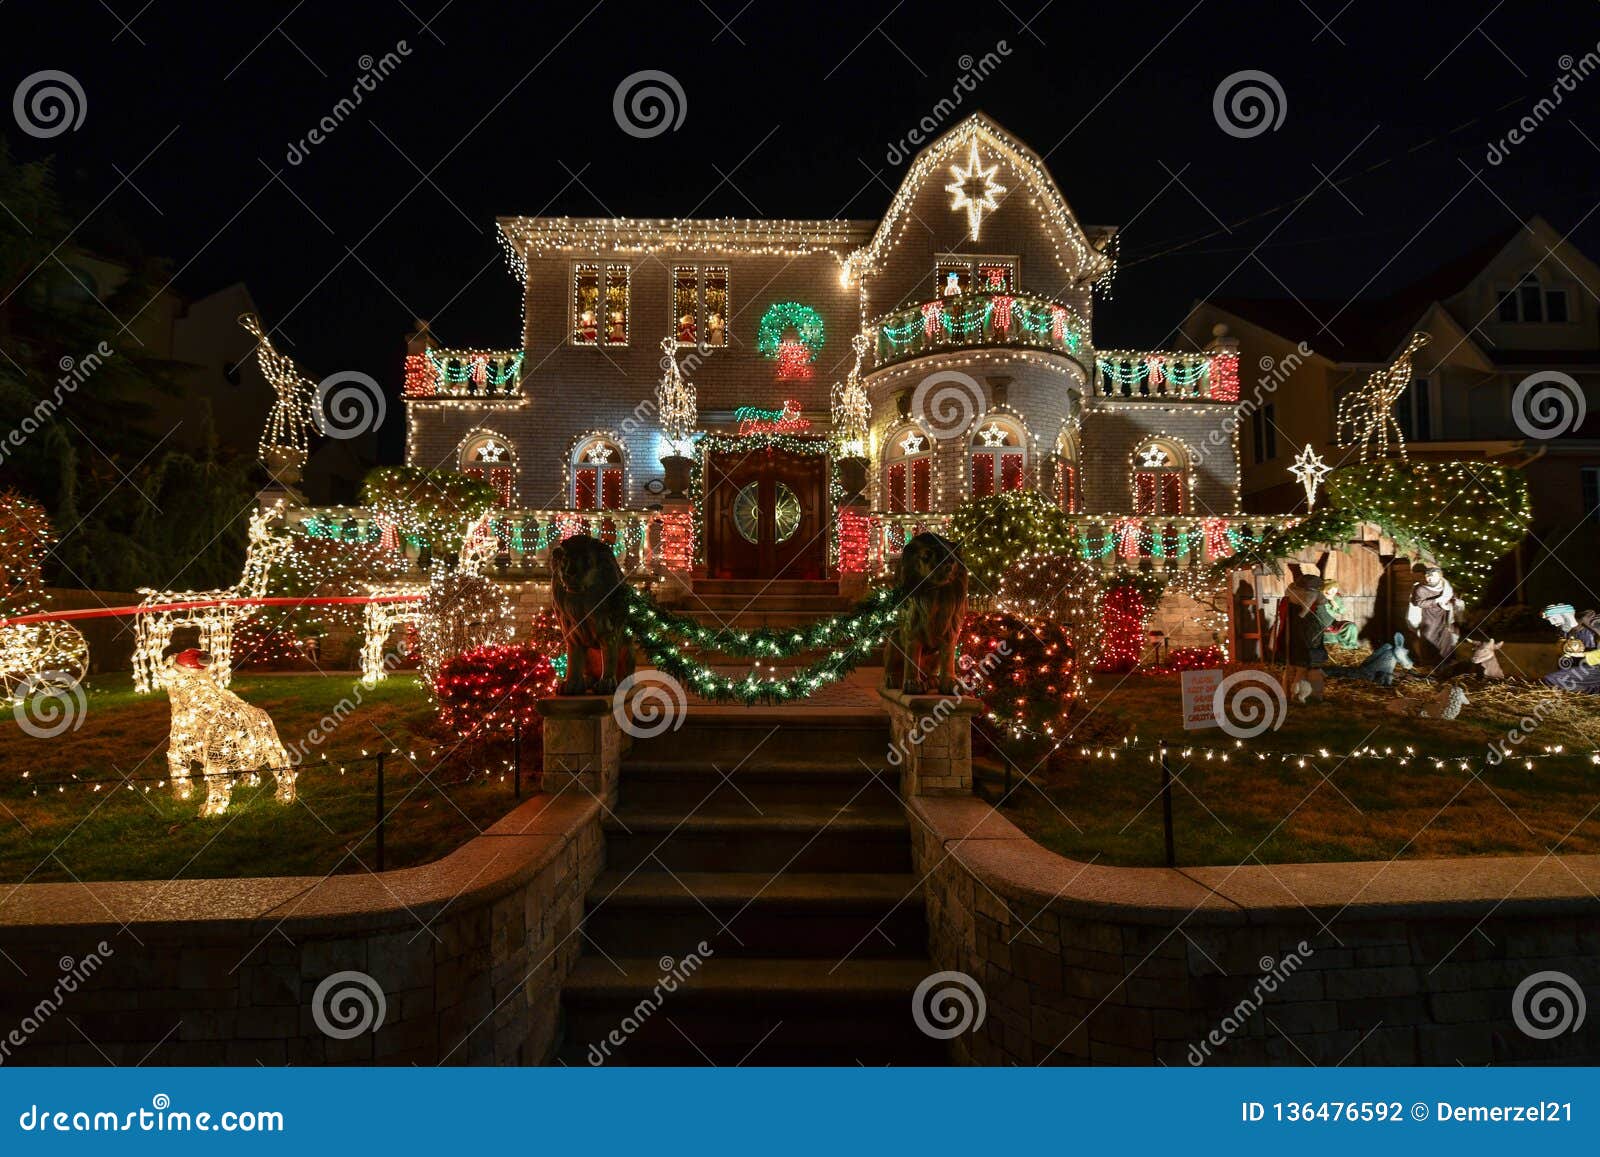 christmas decorations - dyker heights